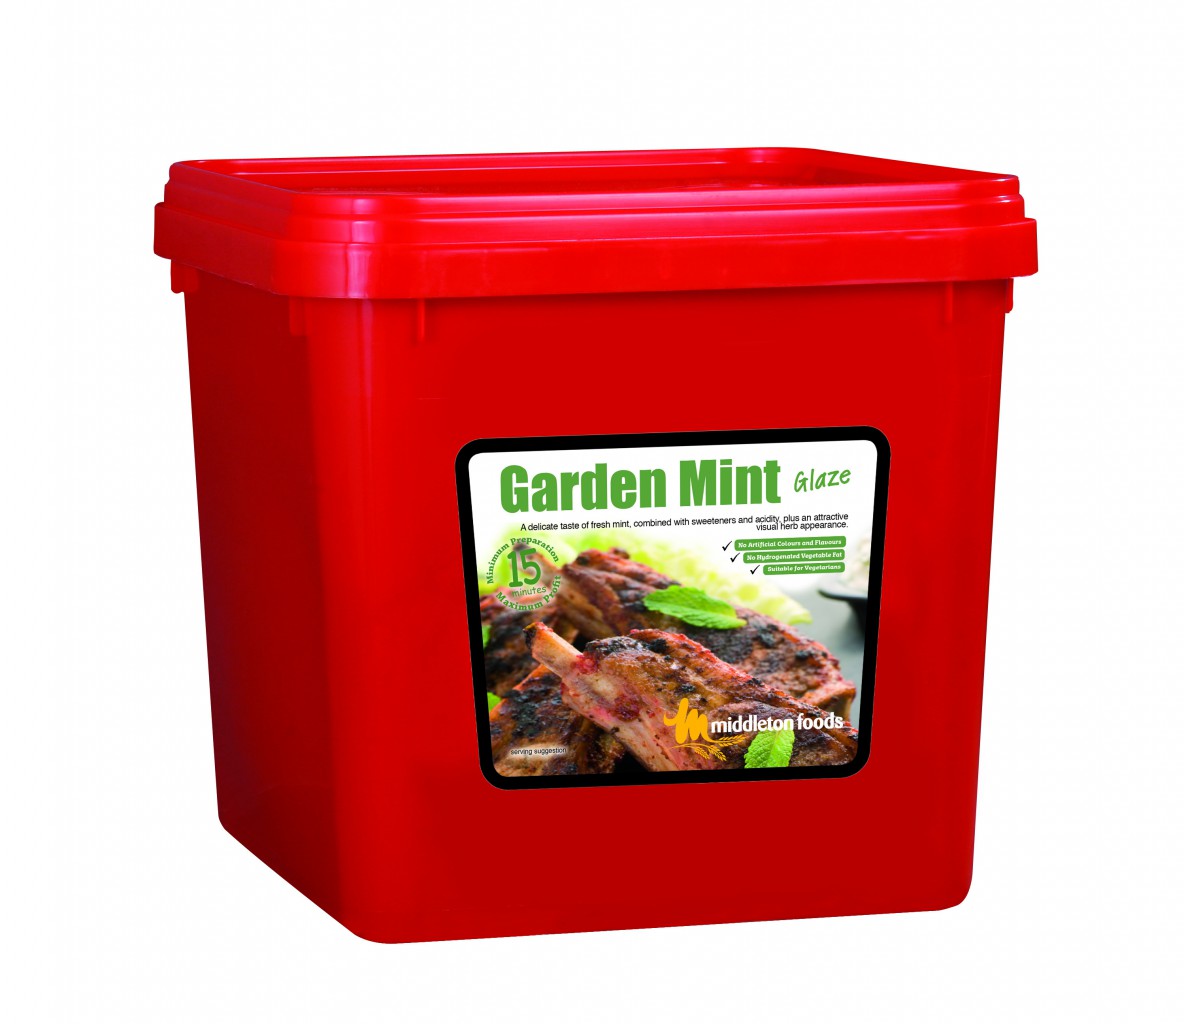 Suppliers Of Middletons Glaze Garden Mint 10kg For The Foods Industry